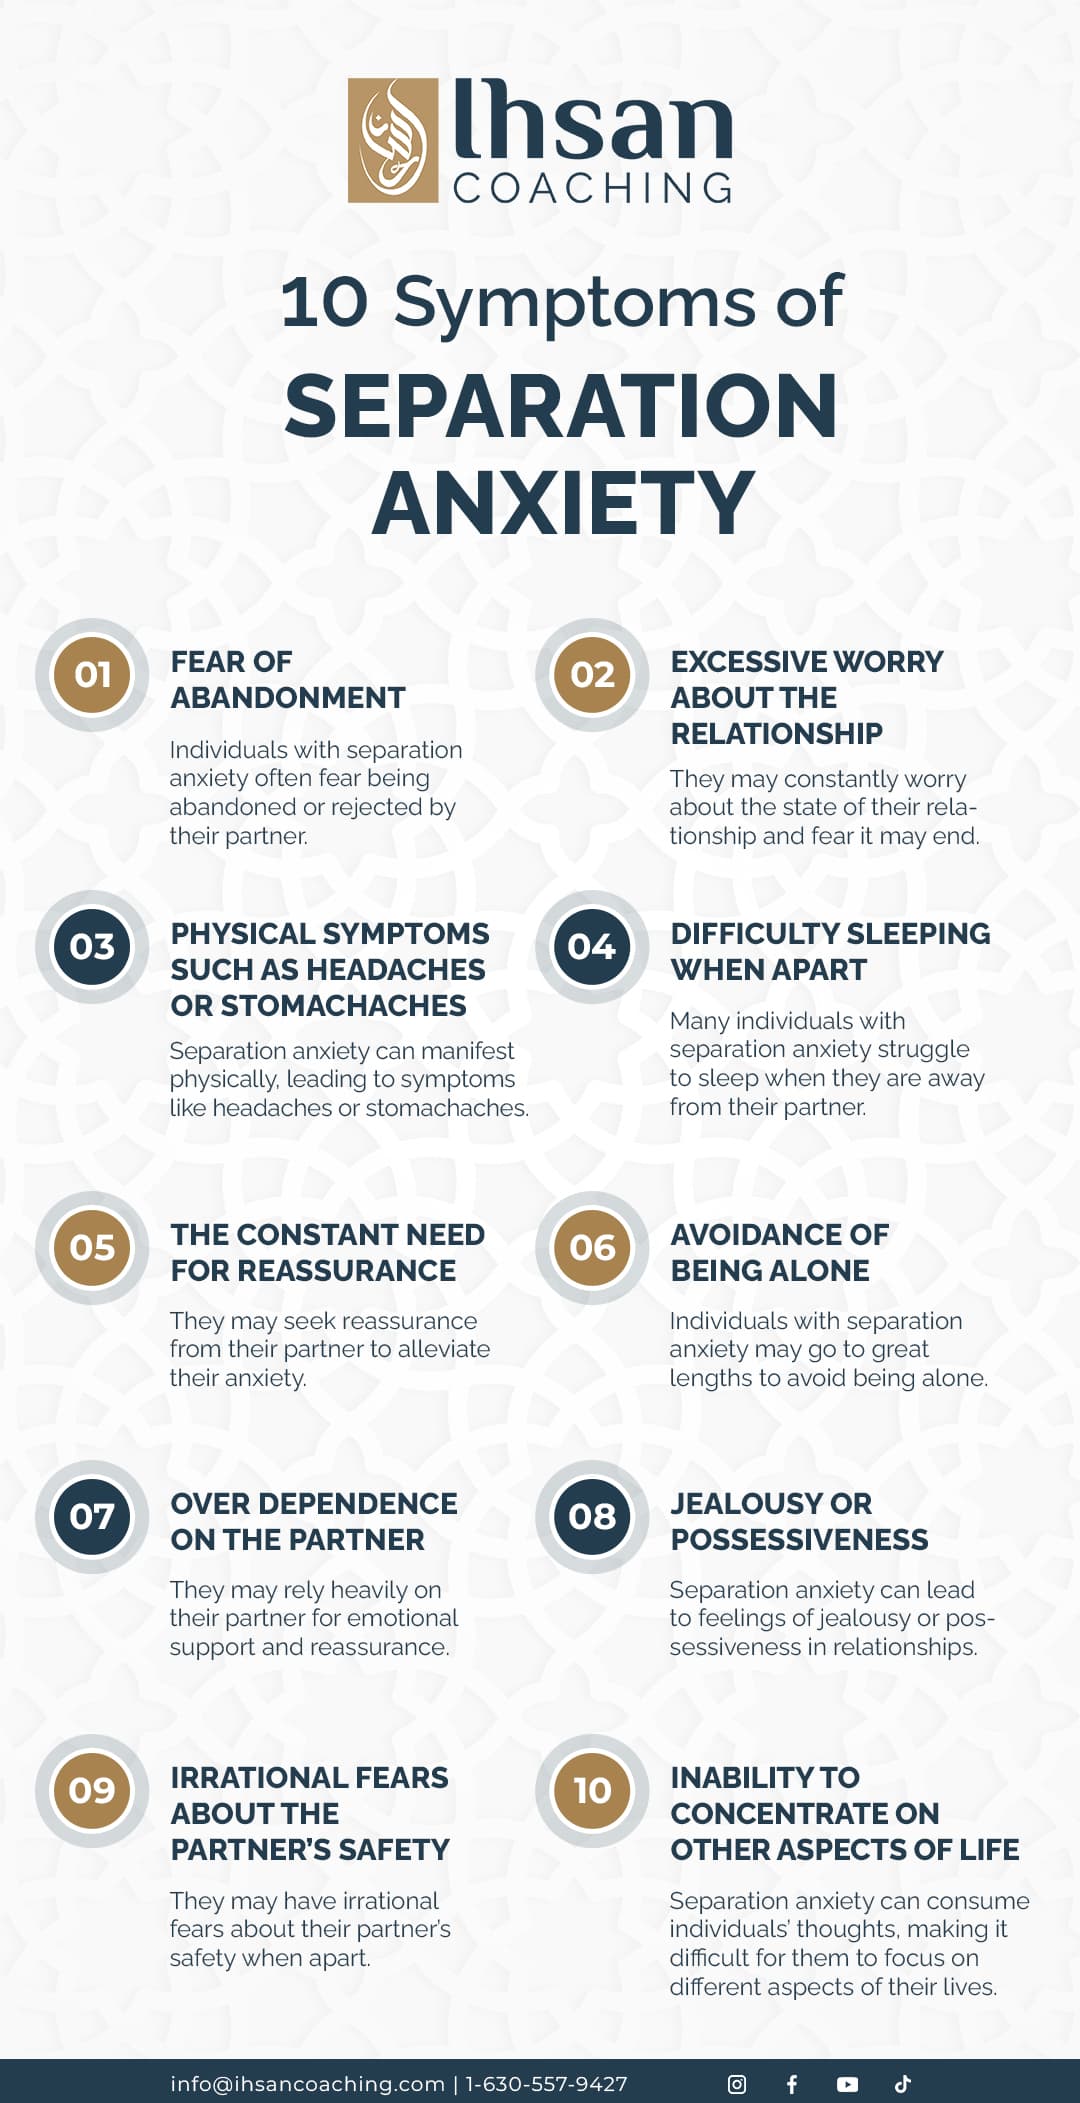 Symptoms of Separation Anxiety in Relationships